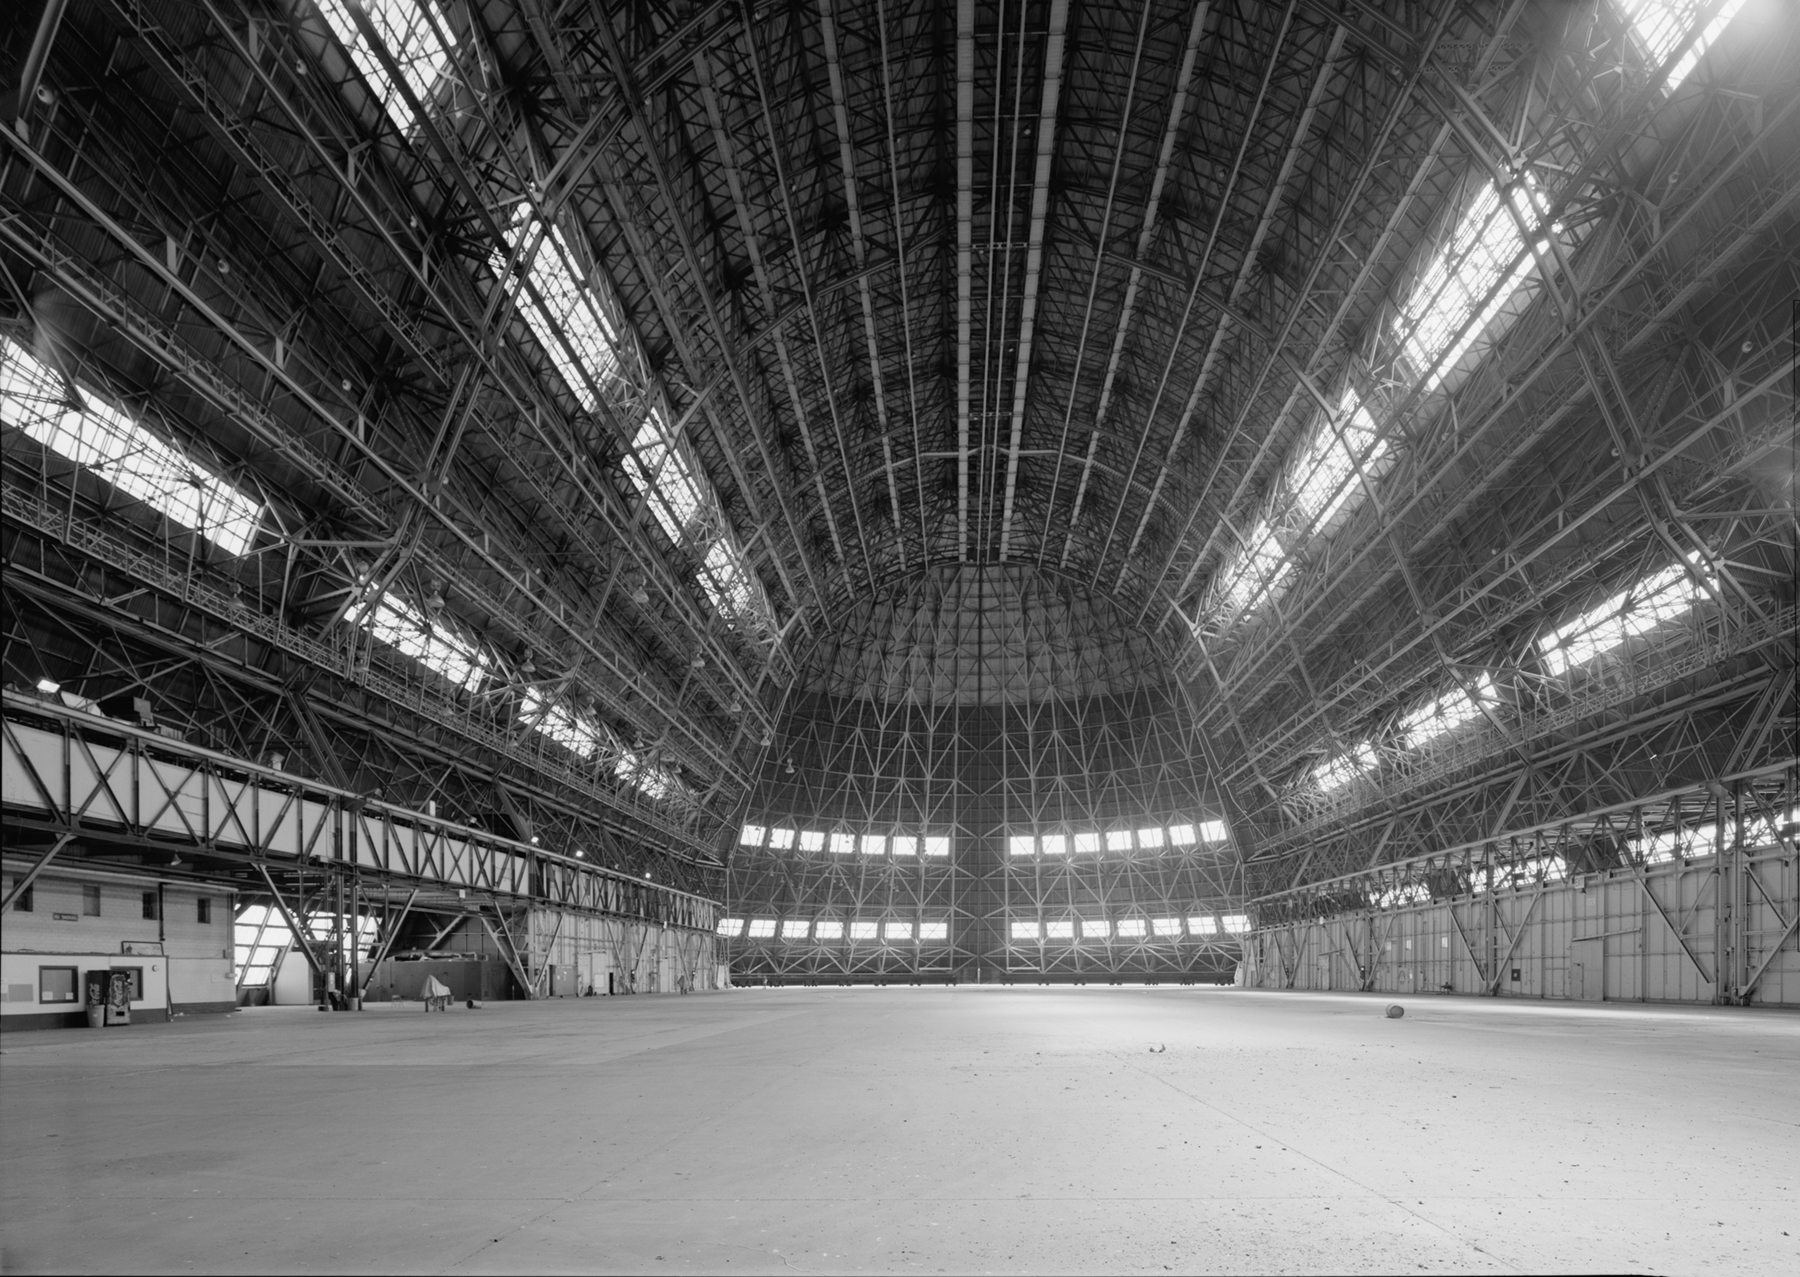 The vast, empty interior space of Hangar 1 and its exposed steel structural system, two rows of long windows, and tall doors at the end of the building.